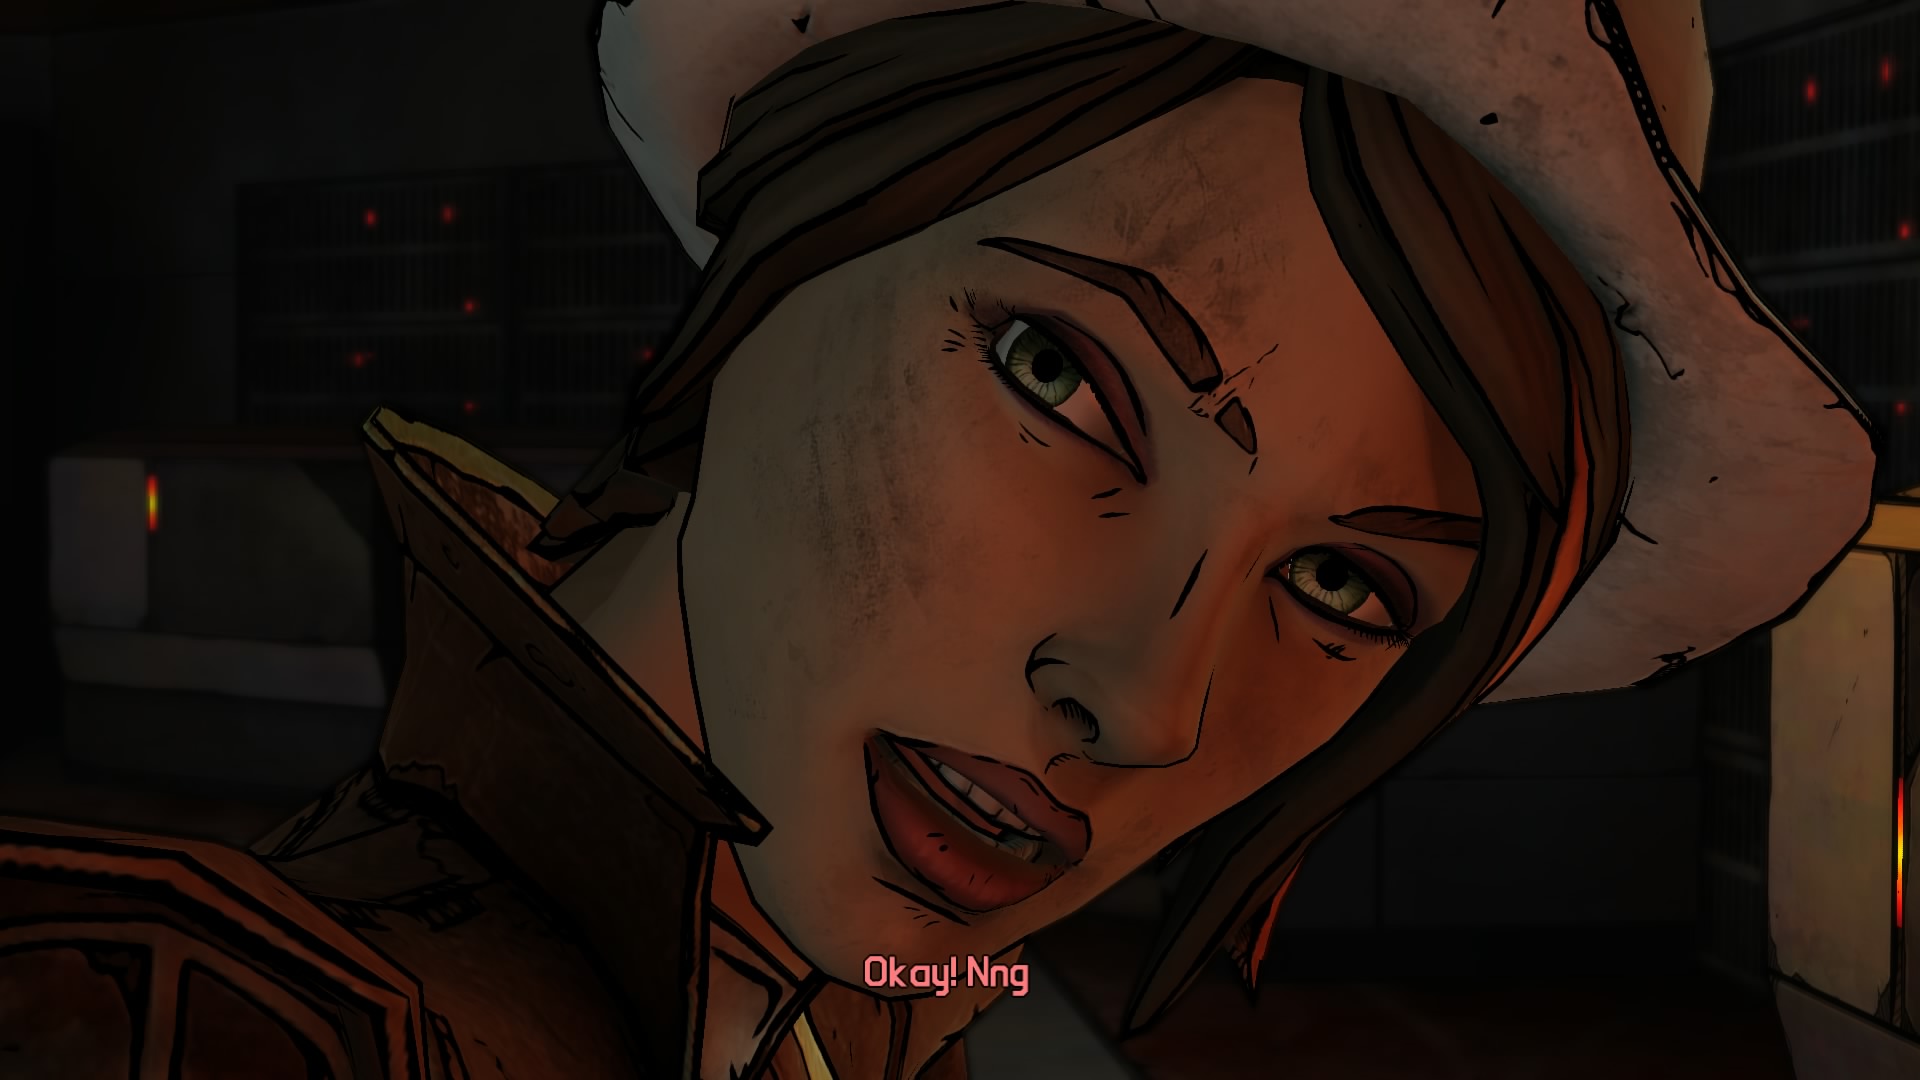 Tales from the Borderlands Ep. 2: Atlas Mugged